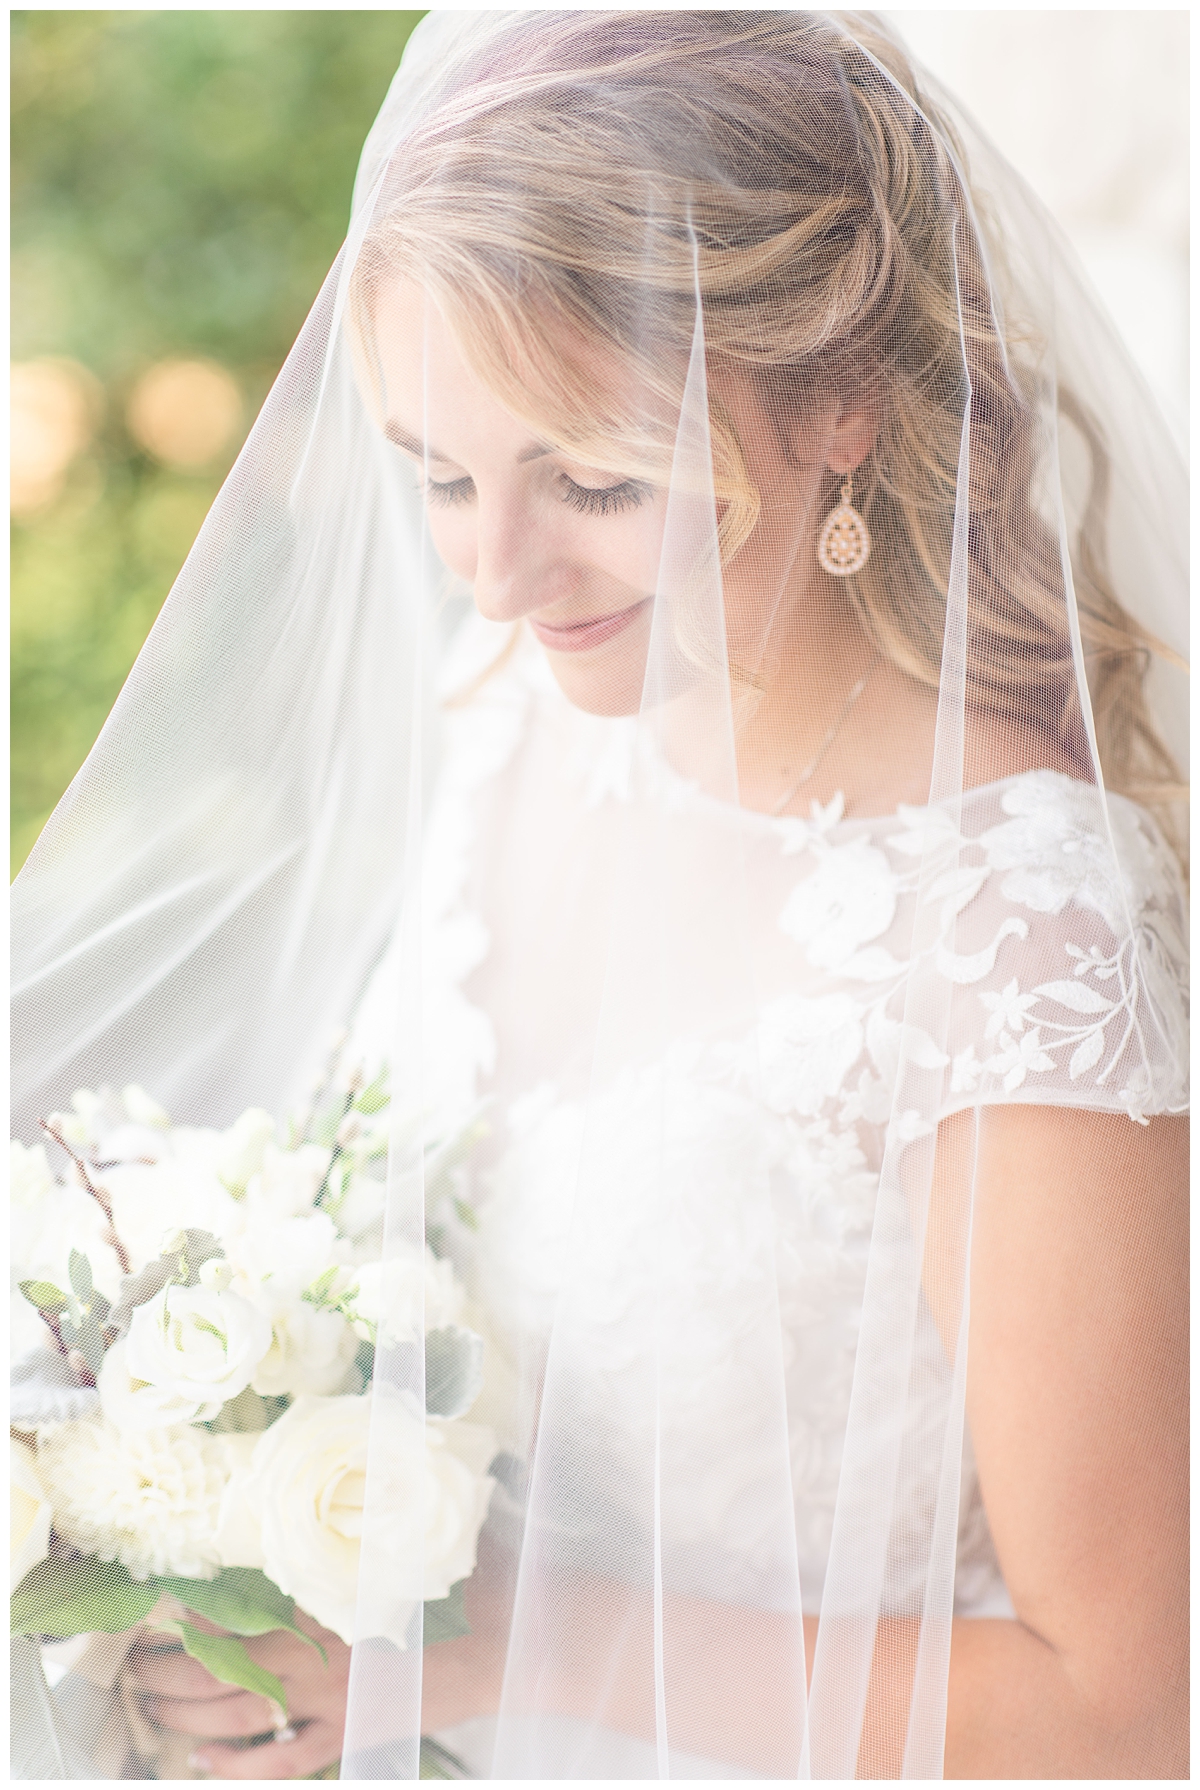 Bride wearing veil with blusher